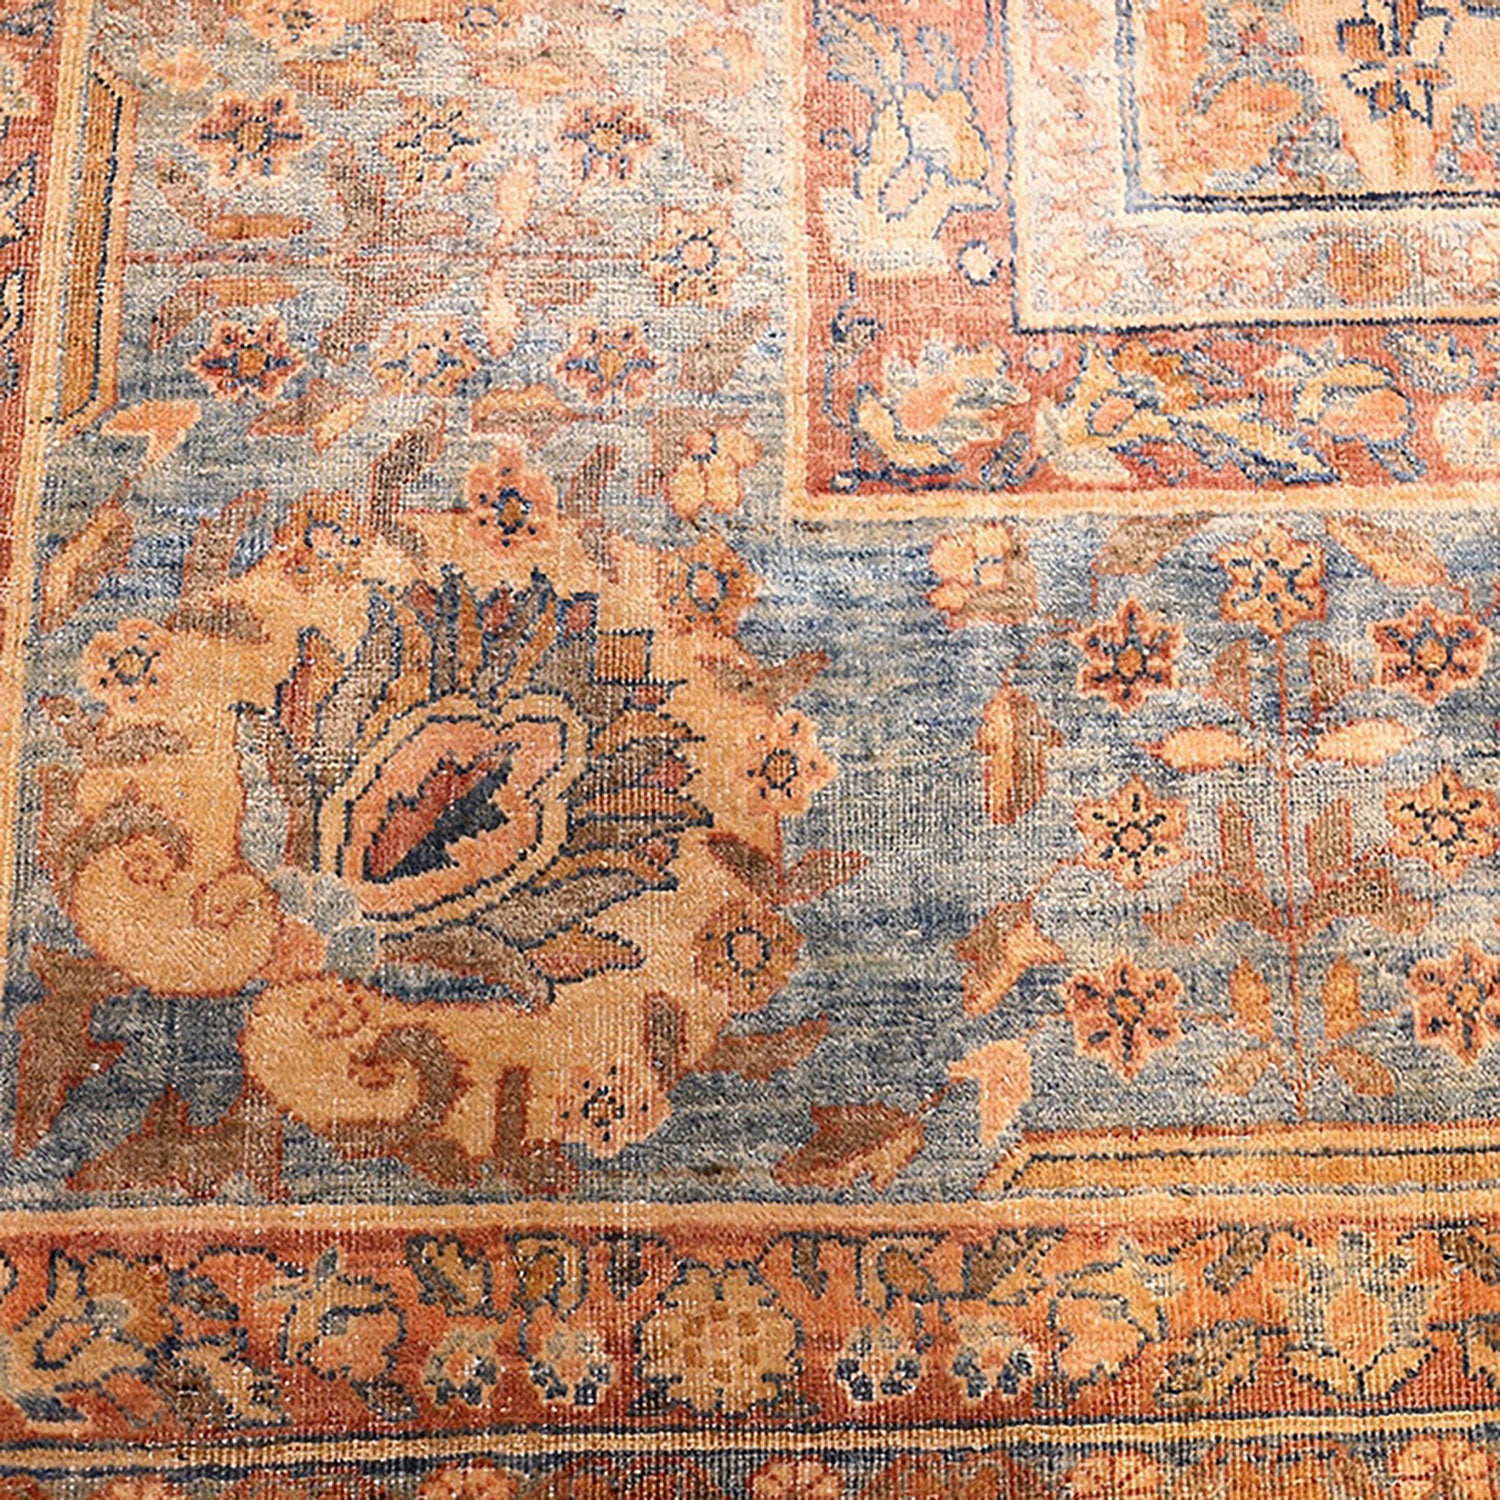 Ornate vintage carpet showcases intricate floral motifs in vibrant colors.